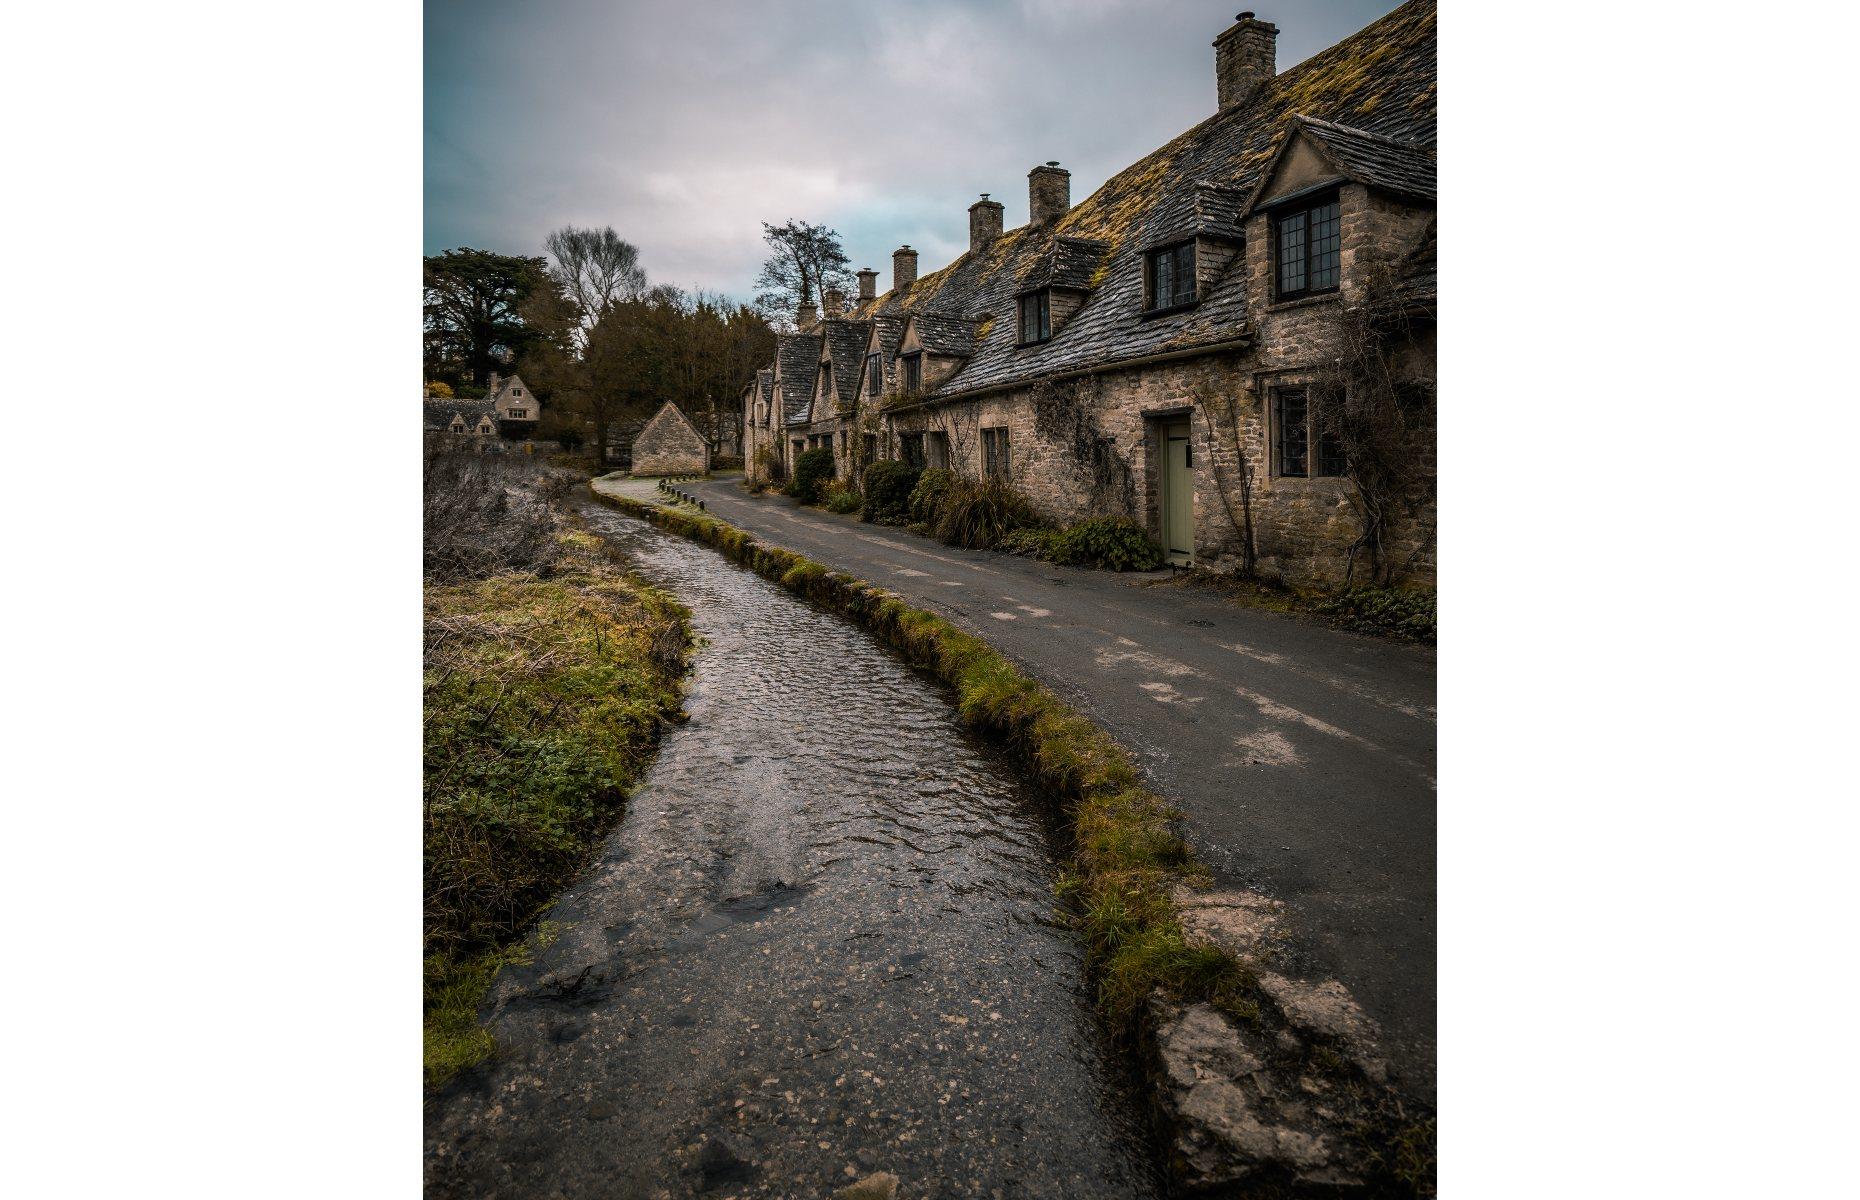 <p>The charming Cotswolds village of Bibury takes on an altogether spookier look in this atmospheric shot, which was taken by Vitalij Bobrovic. Judges praised how the photograph showed off the unique character and identity of the settlement, which was described by textile designer William Morris (1834-96) as "the most beautiful village in England".</p>  <p><a href="https://www.loveexploring.com/gallerylist/69165/the-uks-prettiest-small-towns-and-villages-2021"><strong>Discover more of the UK's most charming villages</strong></a></p>